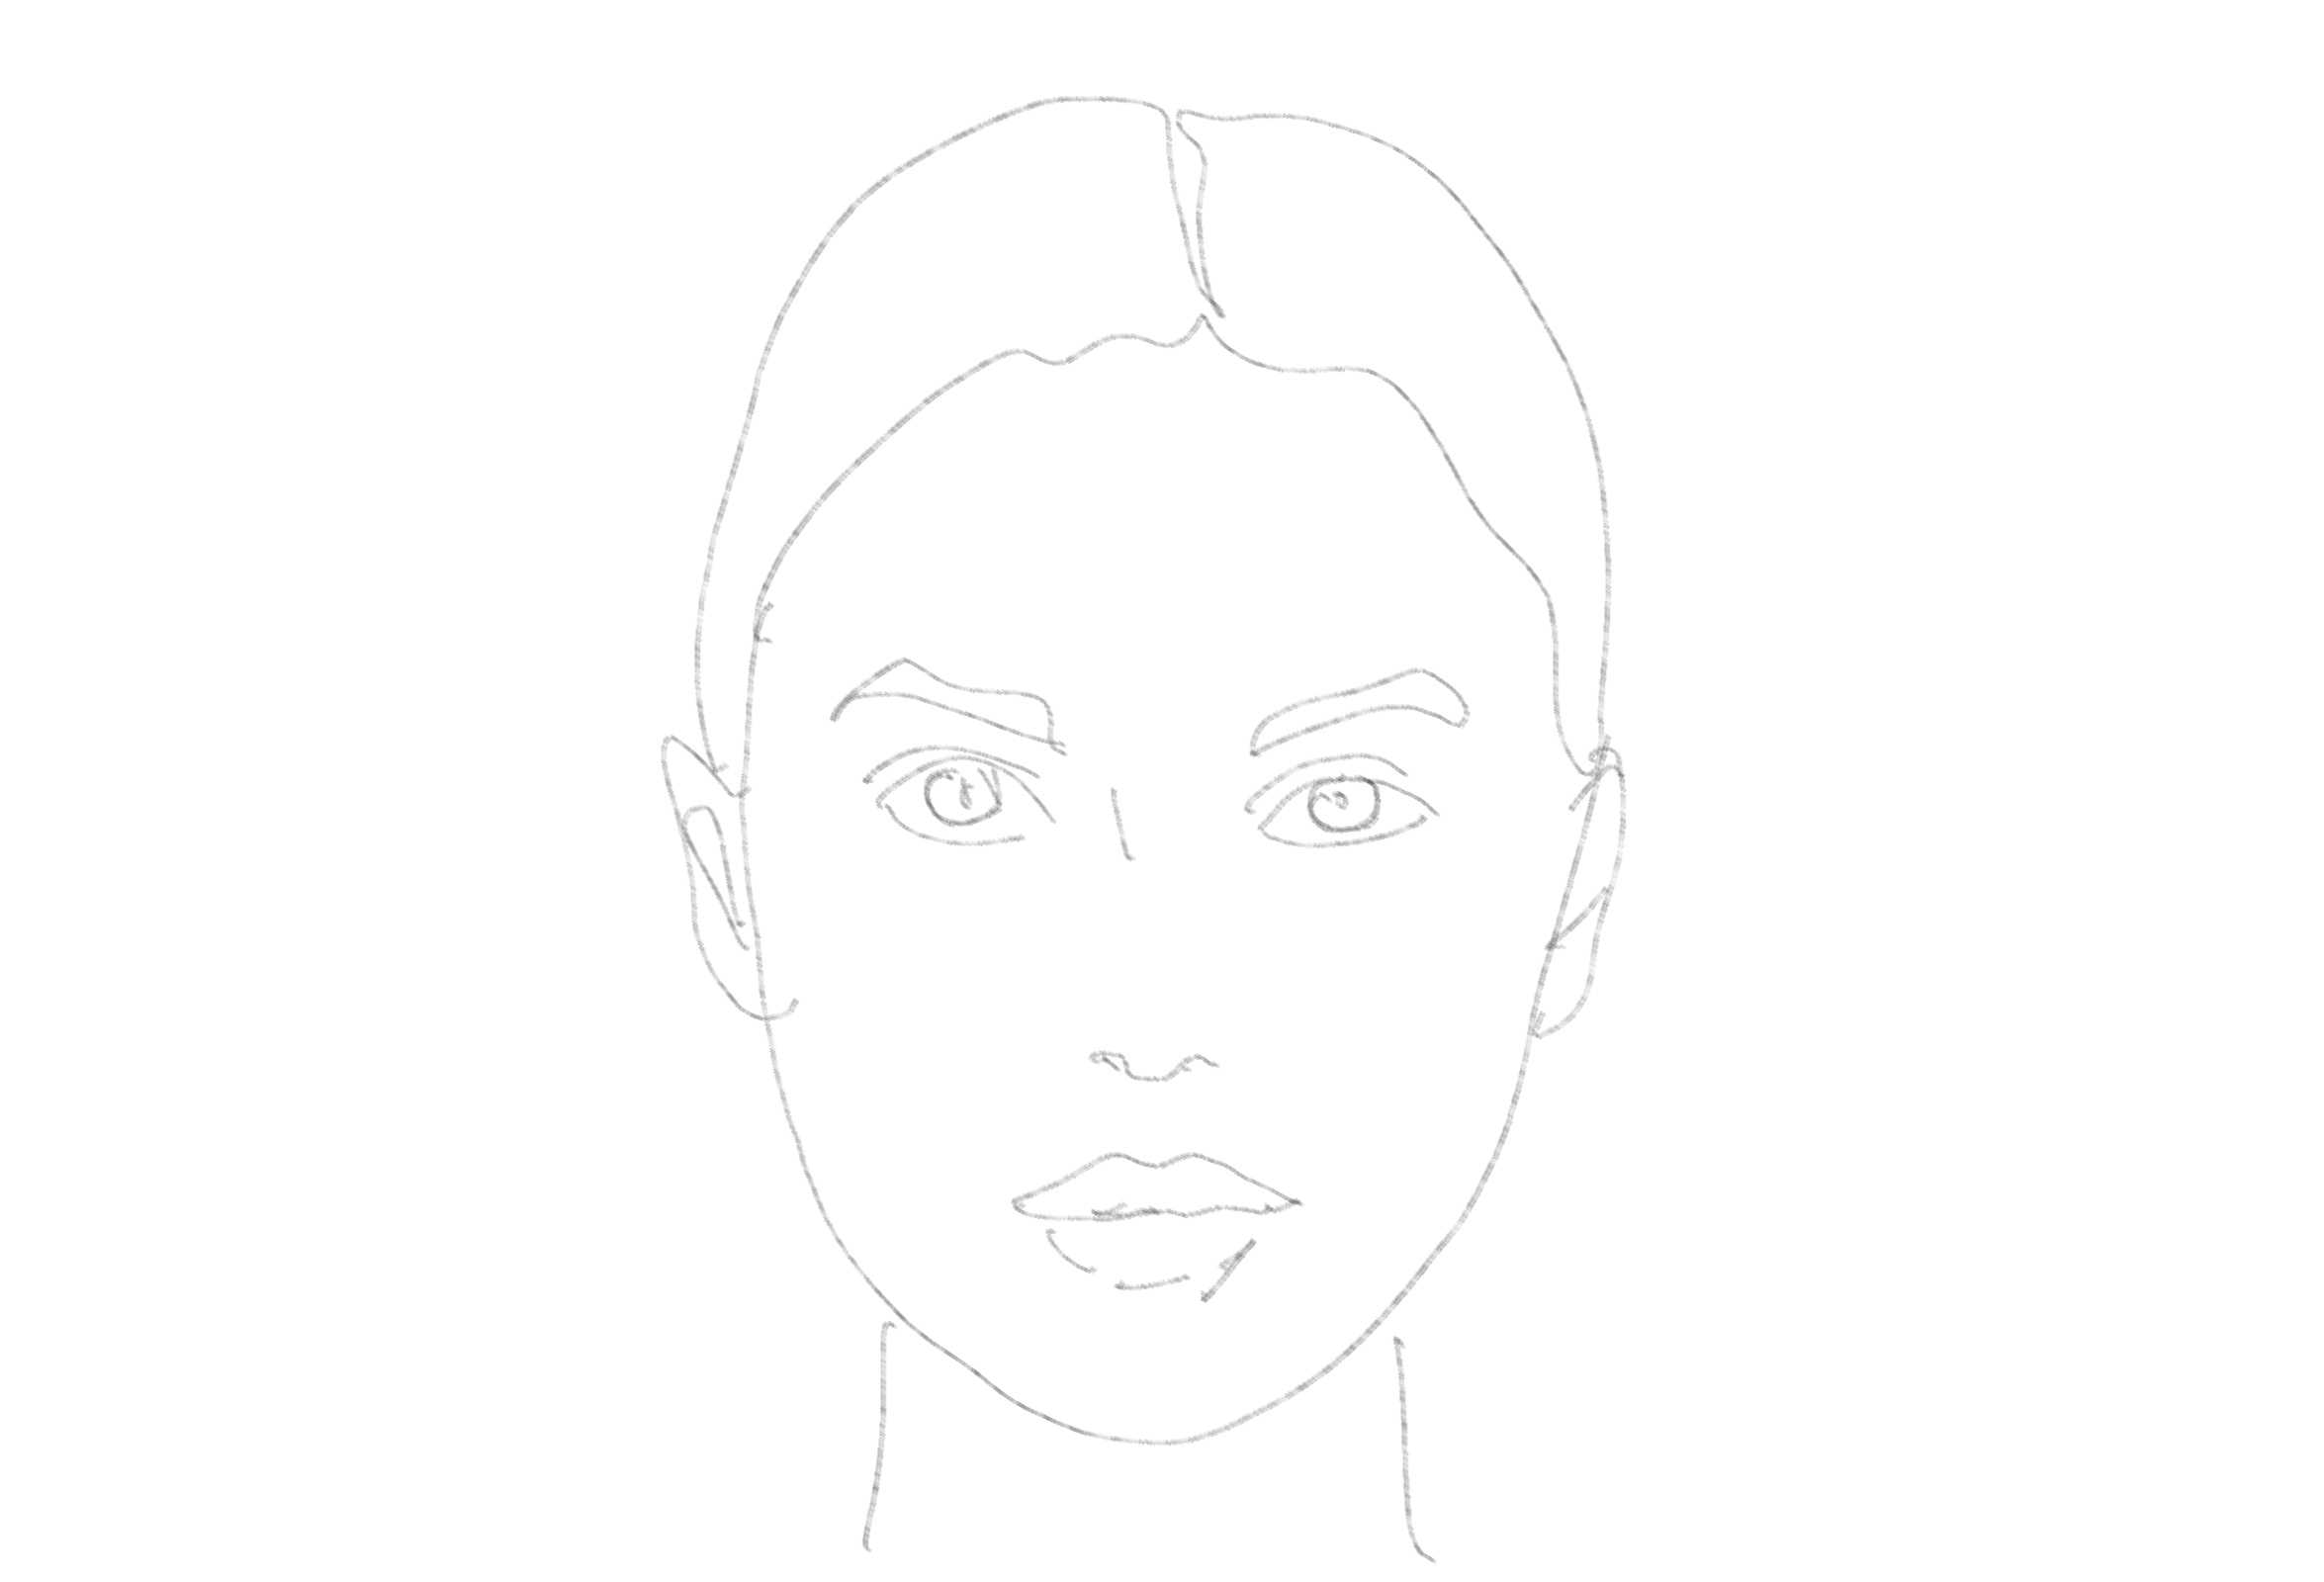 How To Draw Faces Step By Step! (Easy Guide With Images)